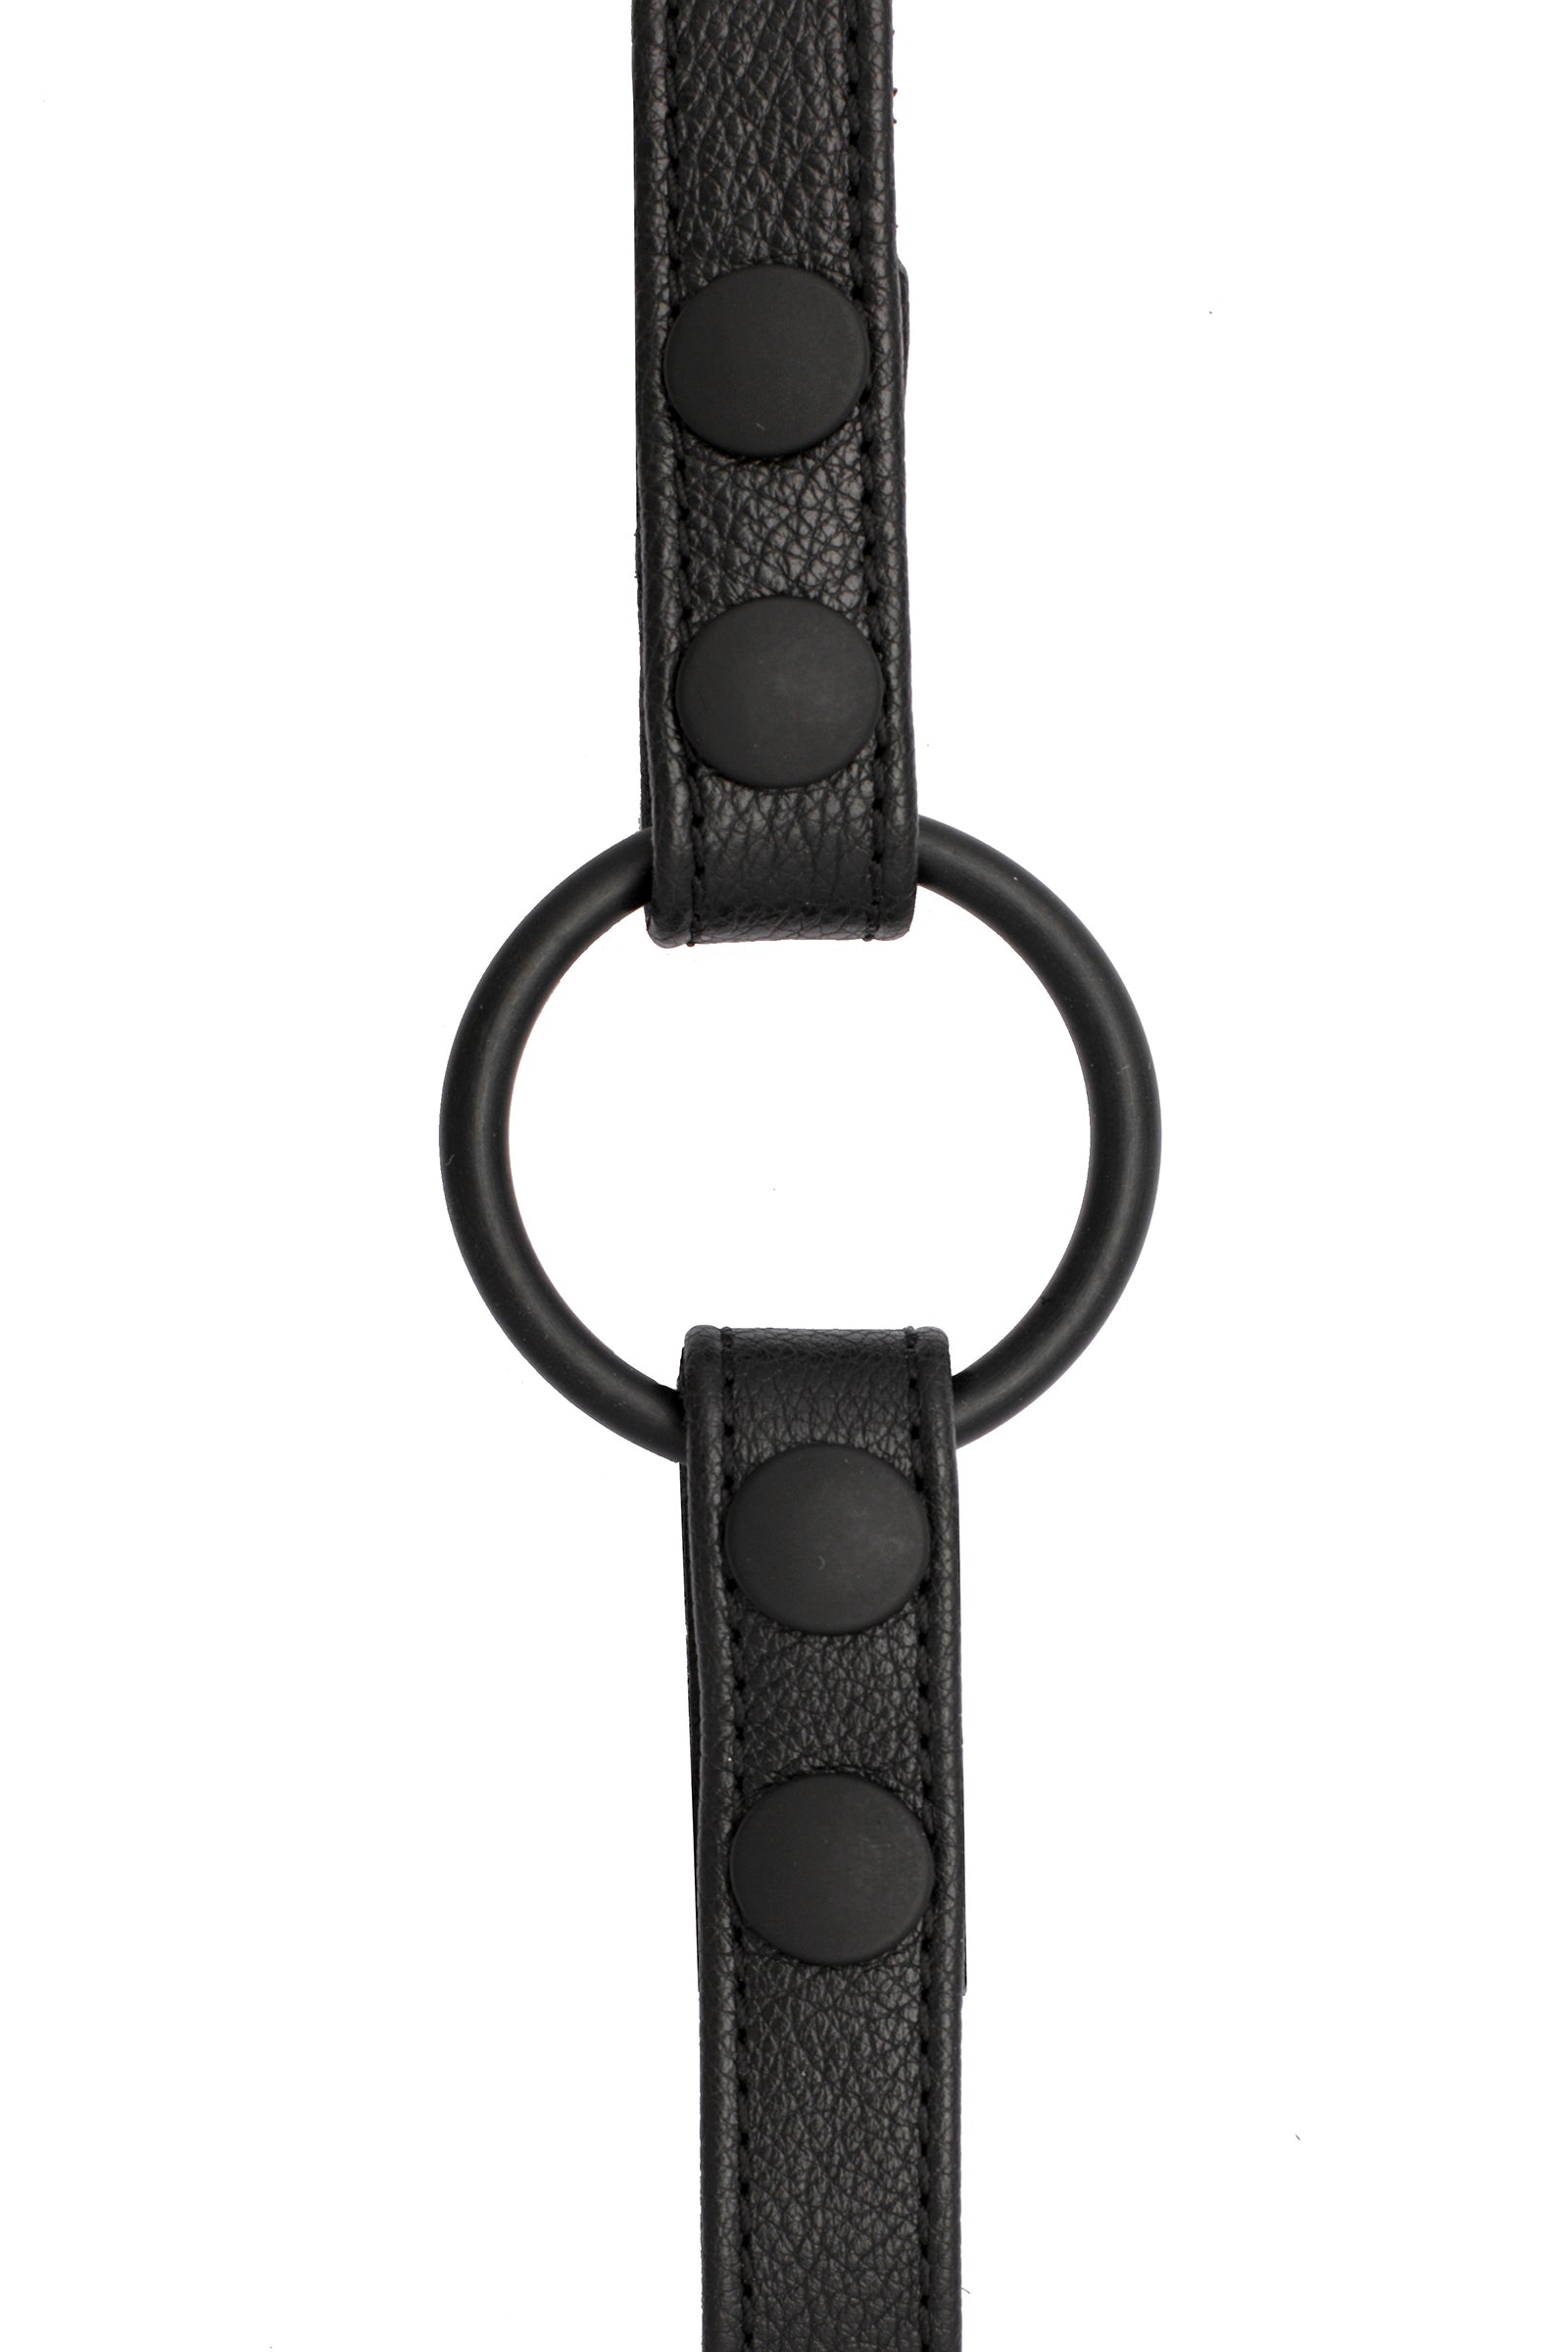 Cockring Strap | Men's Premium Leather Necklace |ARMY OF MEN